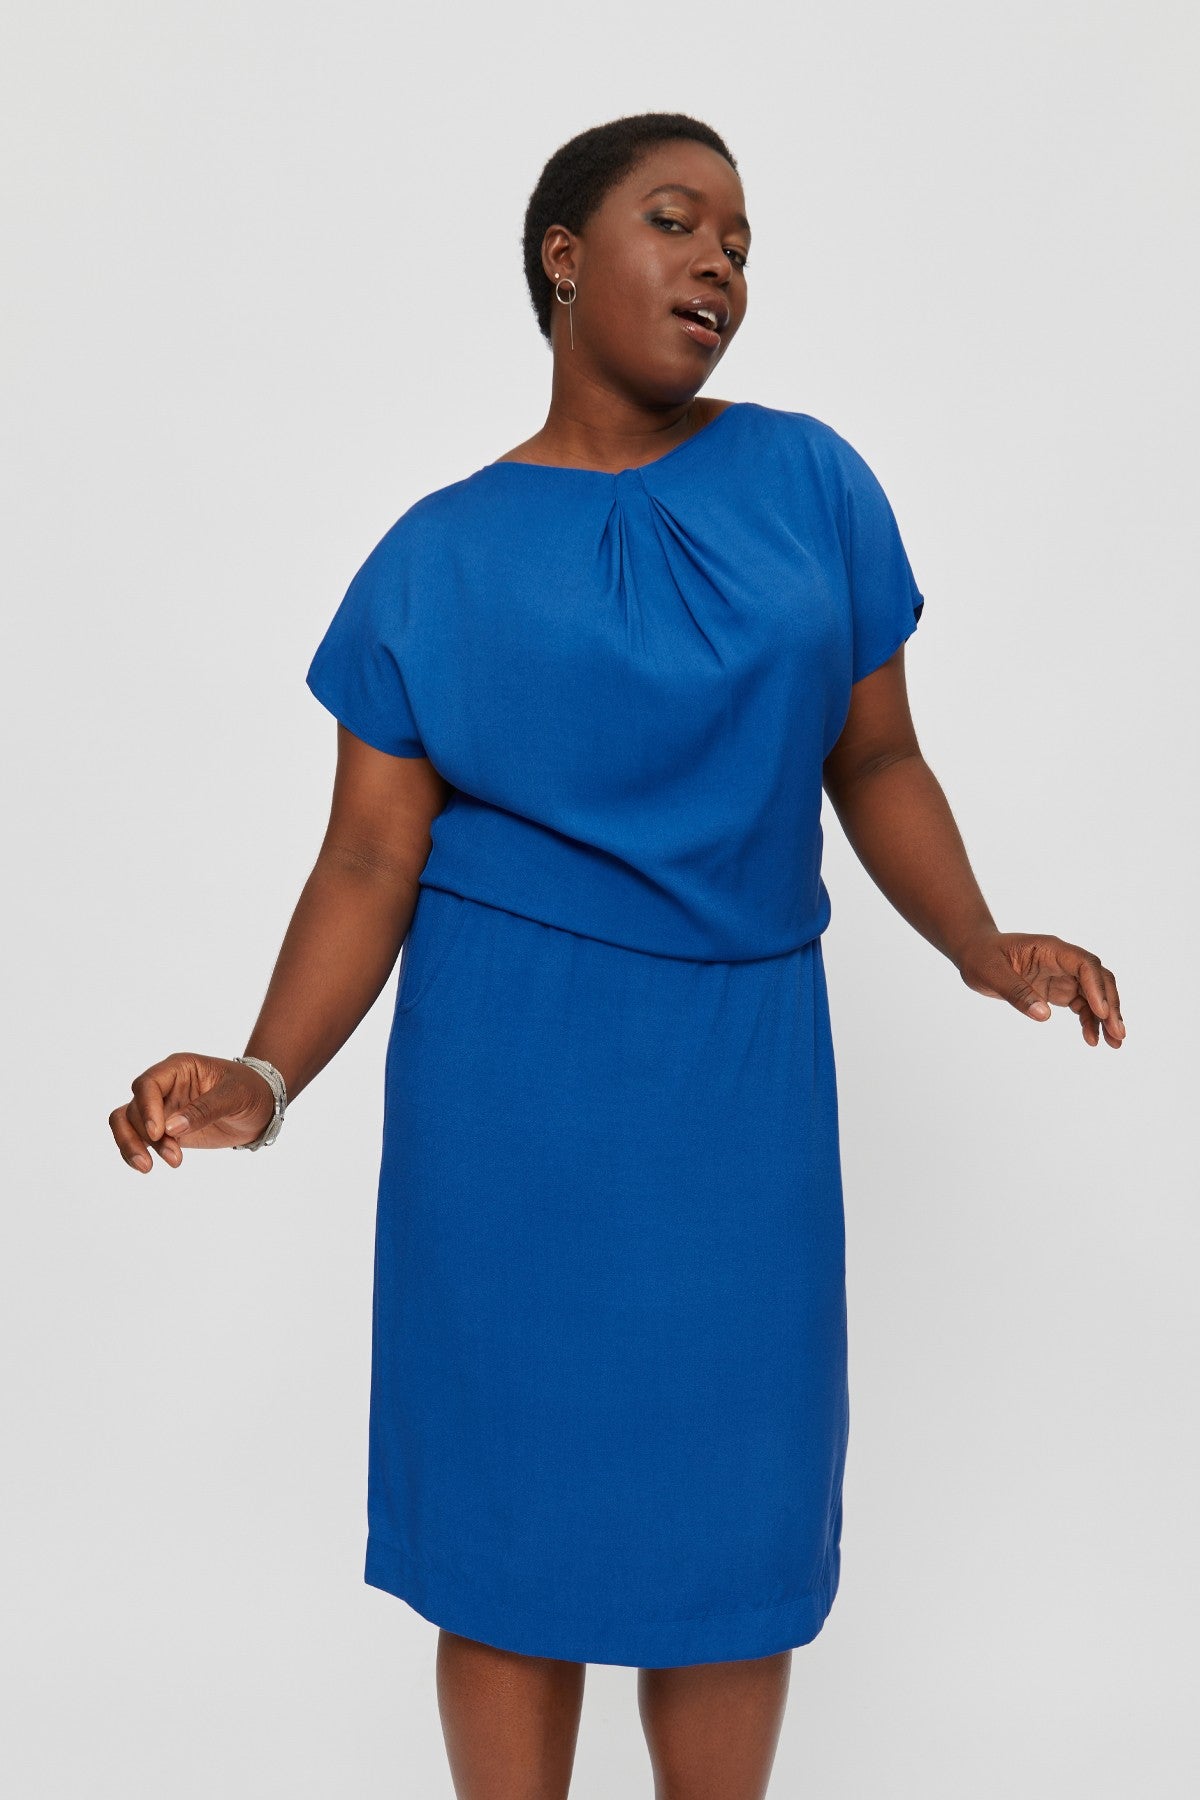 Amy | Midi Dress with Pencil Skirt and Neckline Detail in Classic Blue